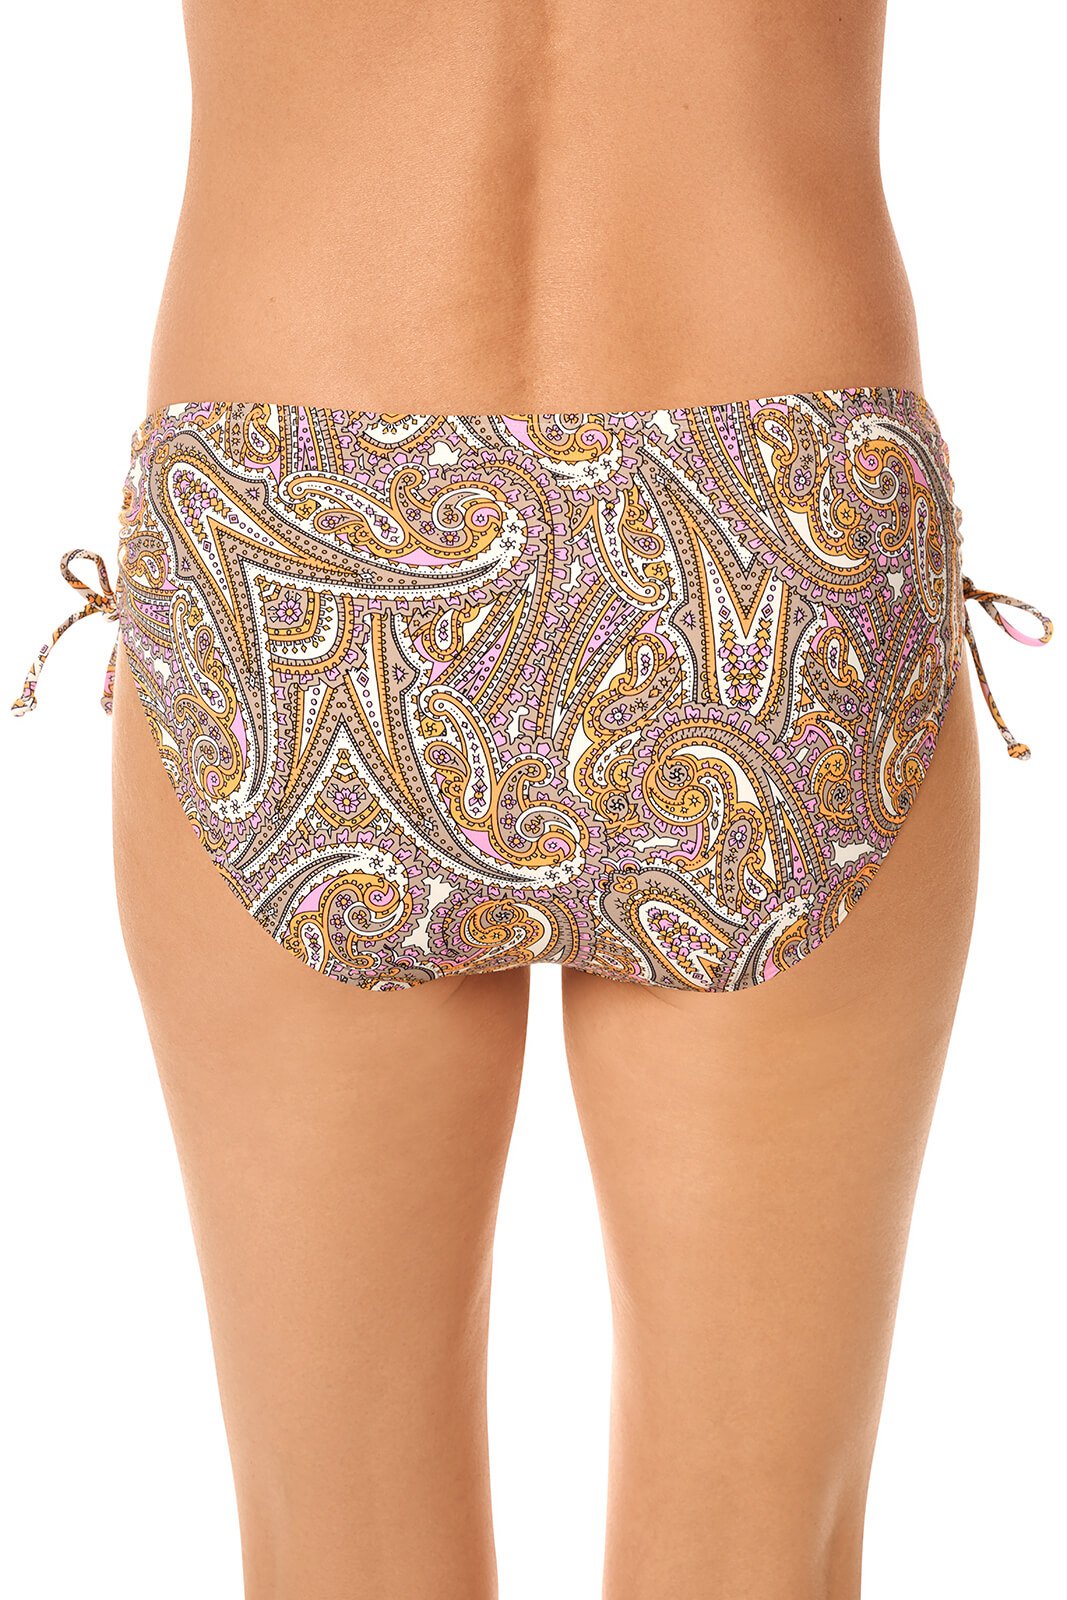 Marrakech Medium Height Panty - Paisley Print worn by model back view